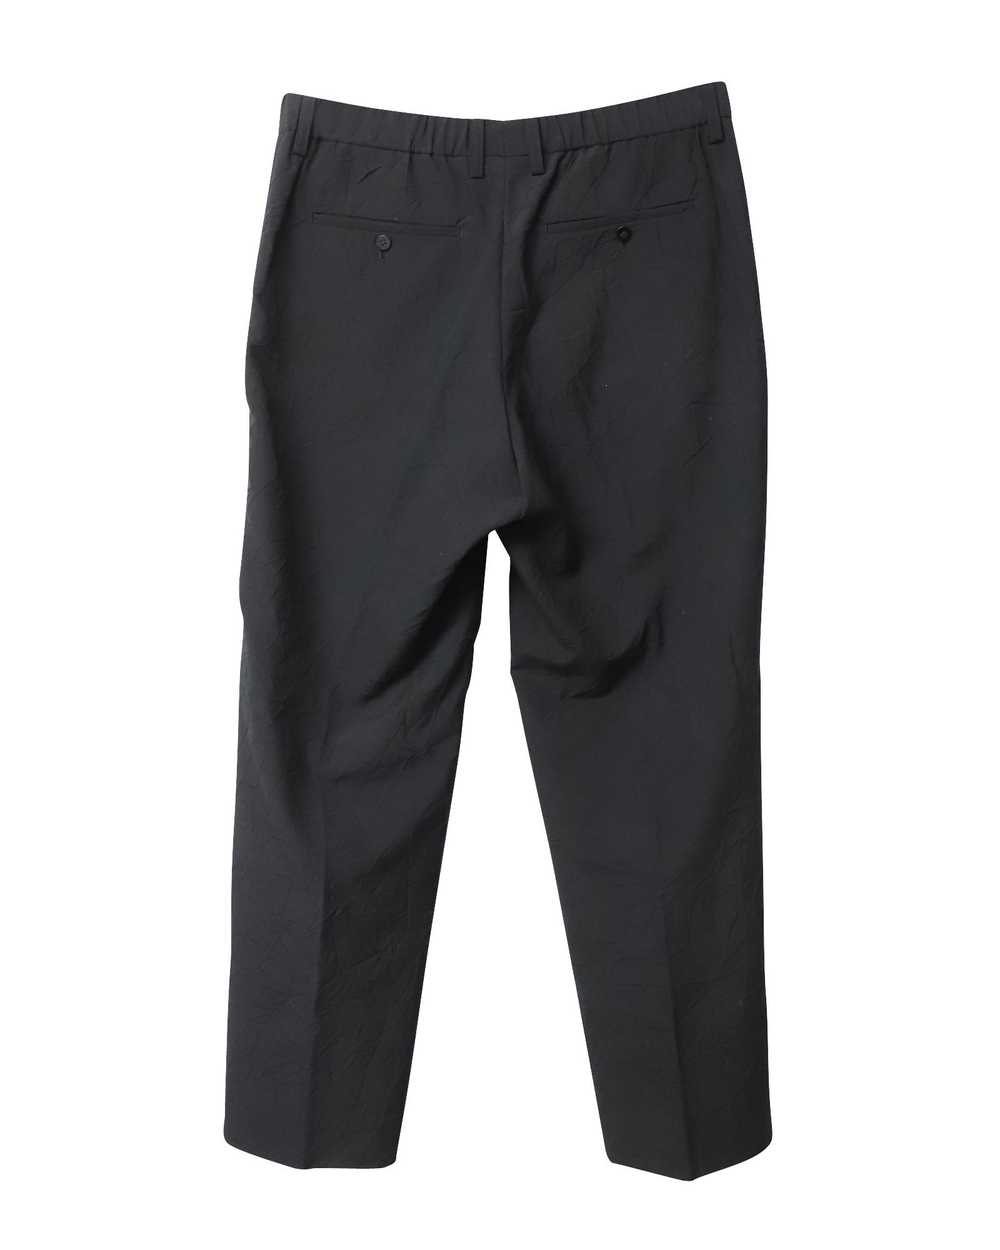 Product Details Black tailored trousers - image 3